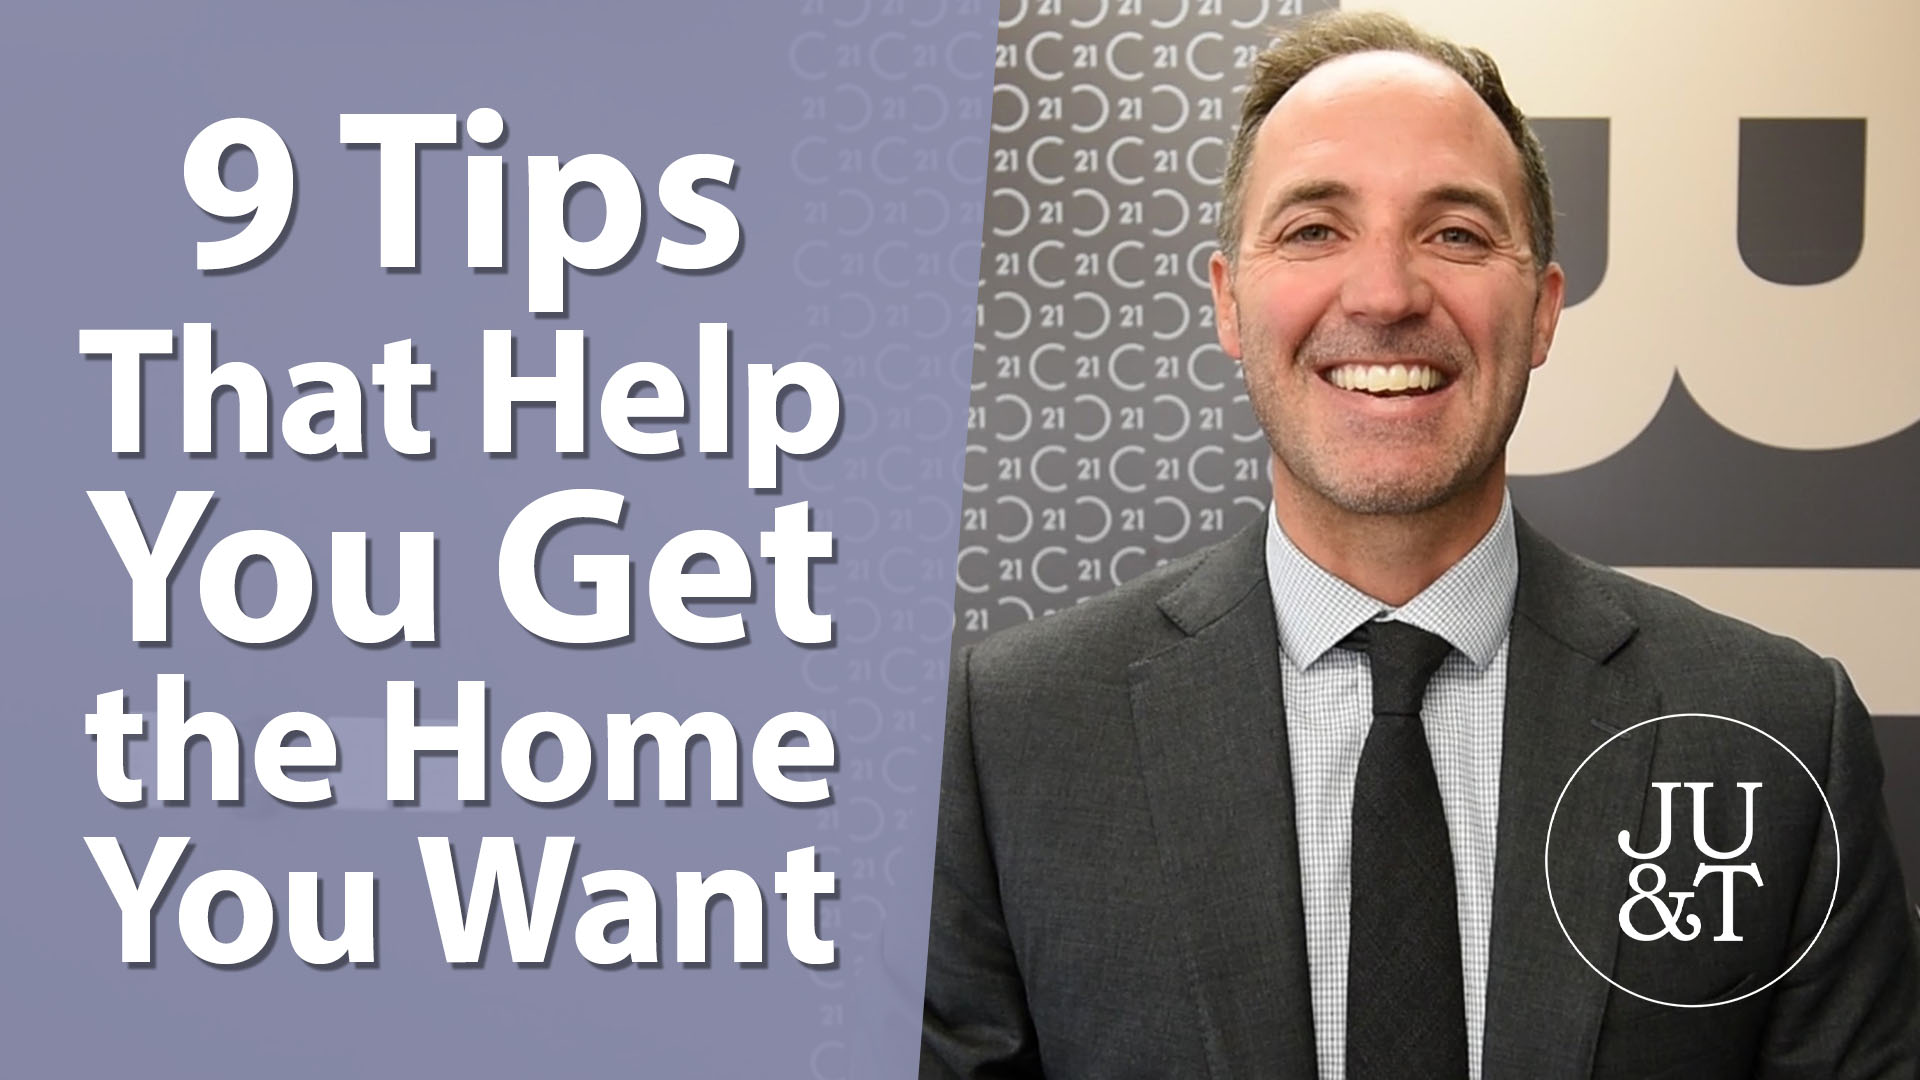 Q: Which Tips Will Help You Land the Home You Want?